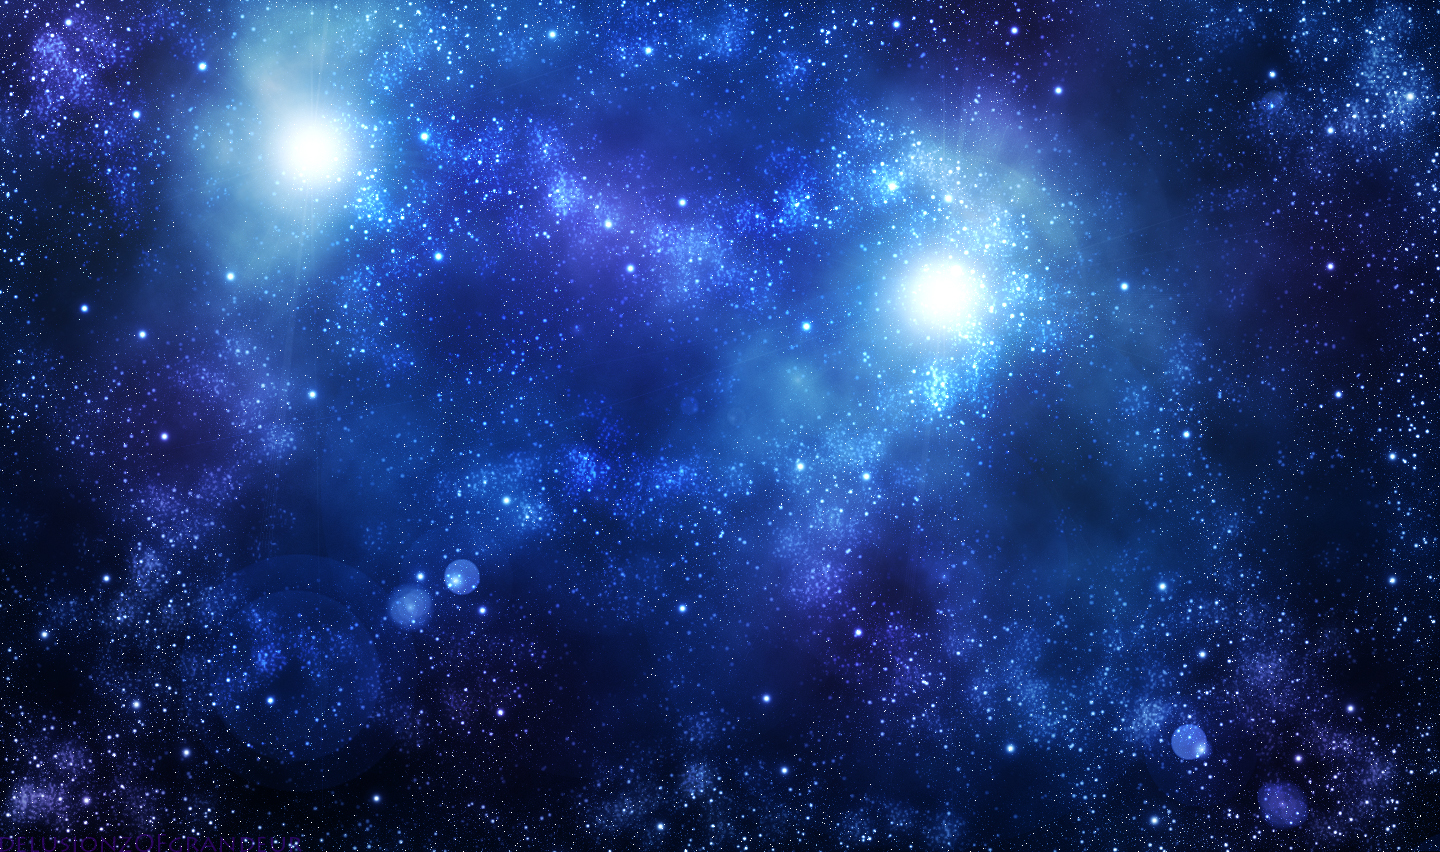 Galaxy HD Wallpapers Space Galaxy HD Wallpapers Check out the cool 1440x852